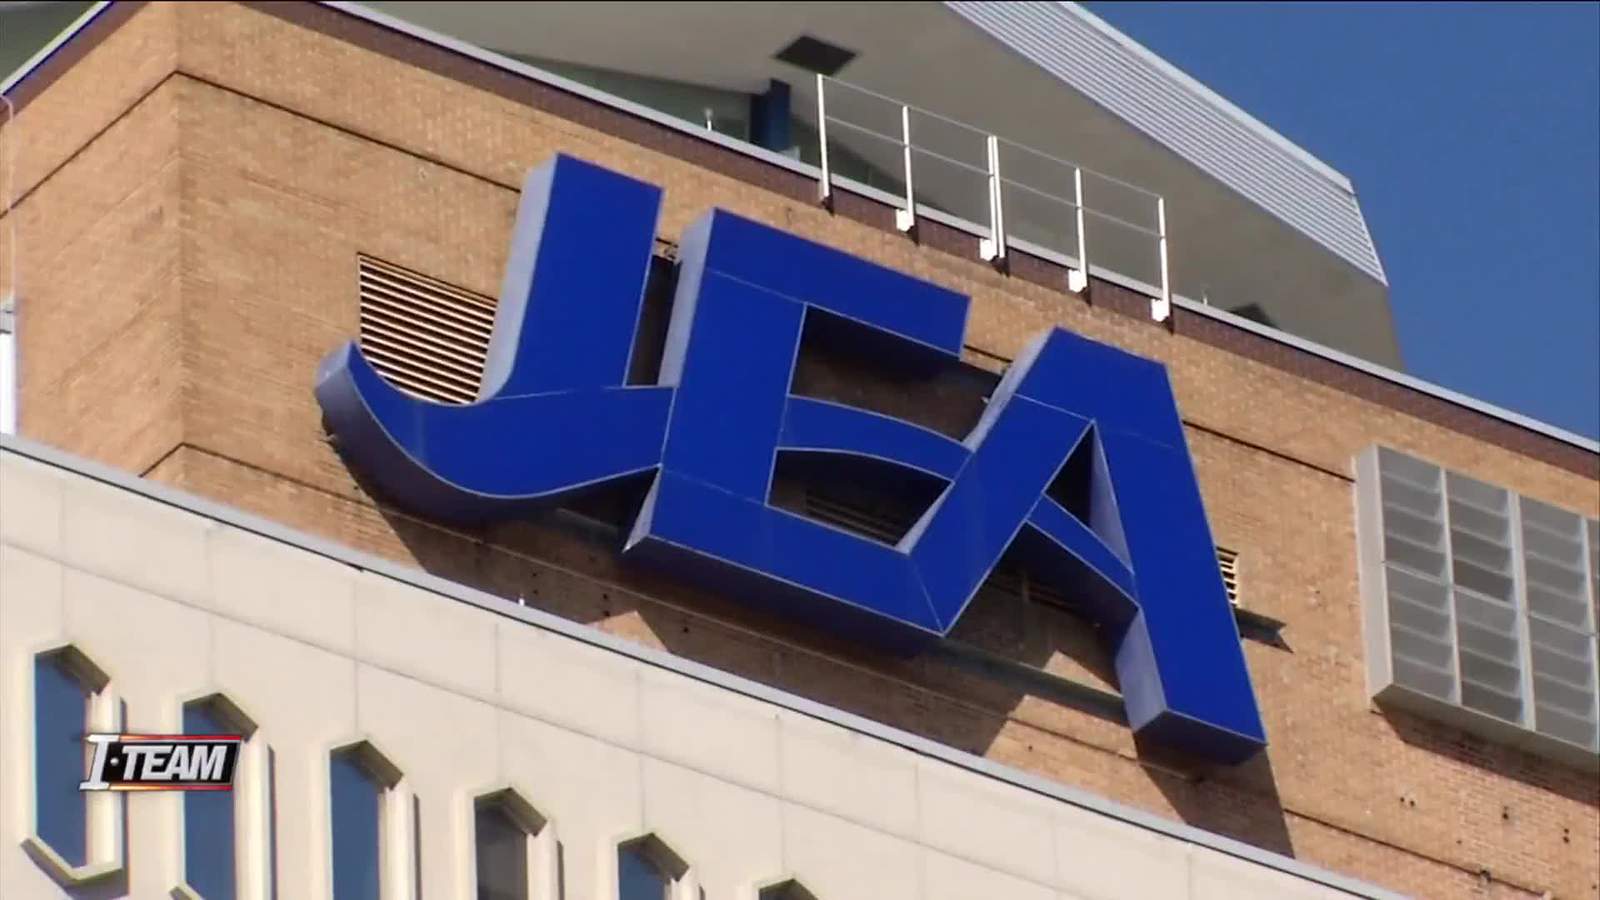 City leaders discuss interviewing key witnesses in attempted JEA sale